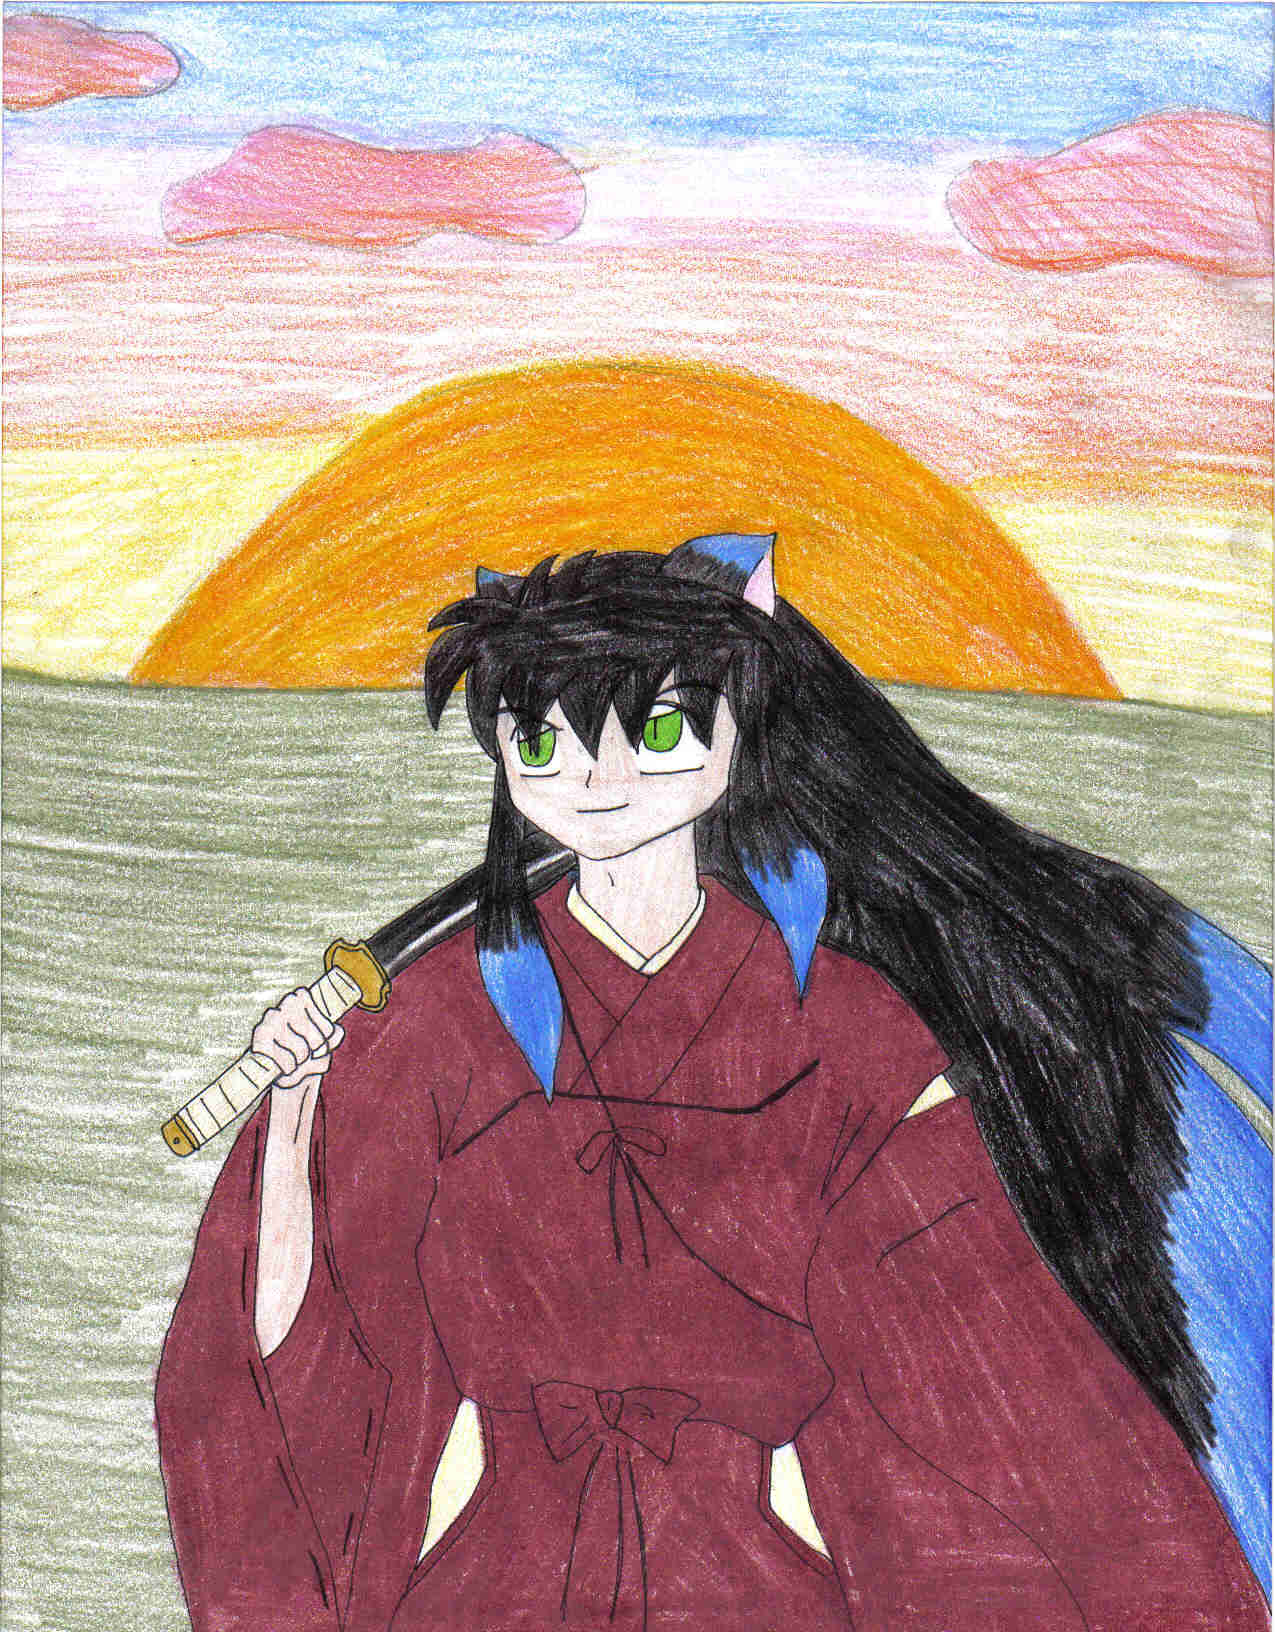 Yao in a weird color by iamkagome93